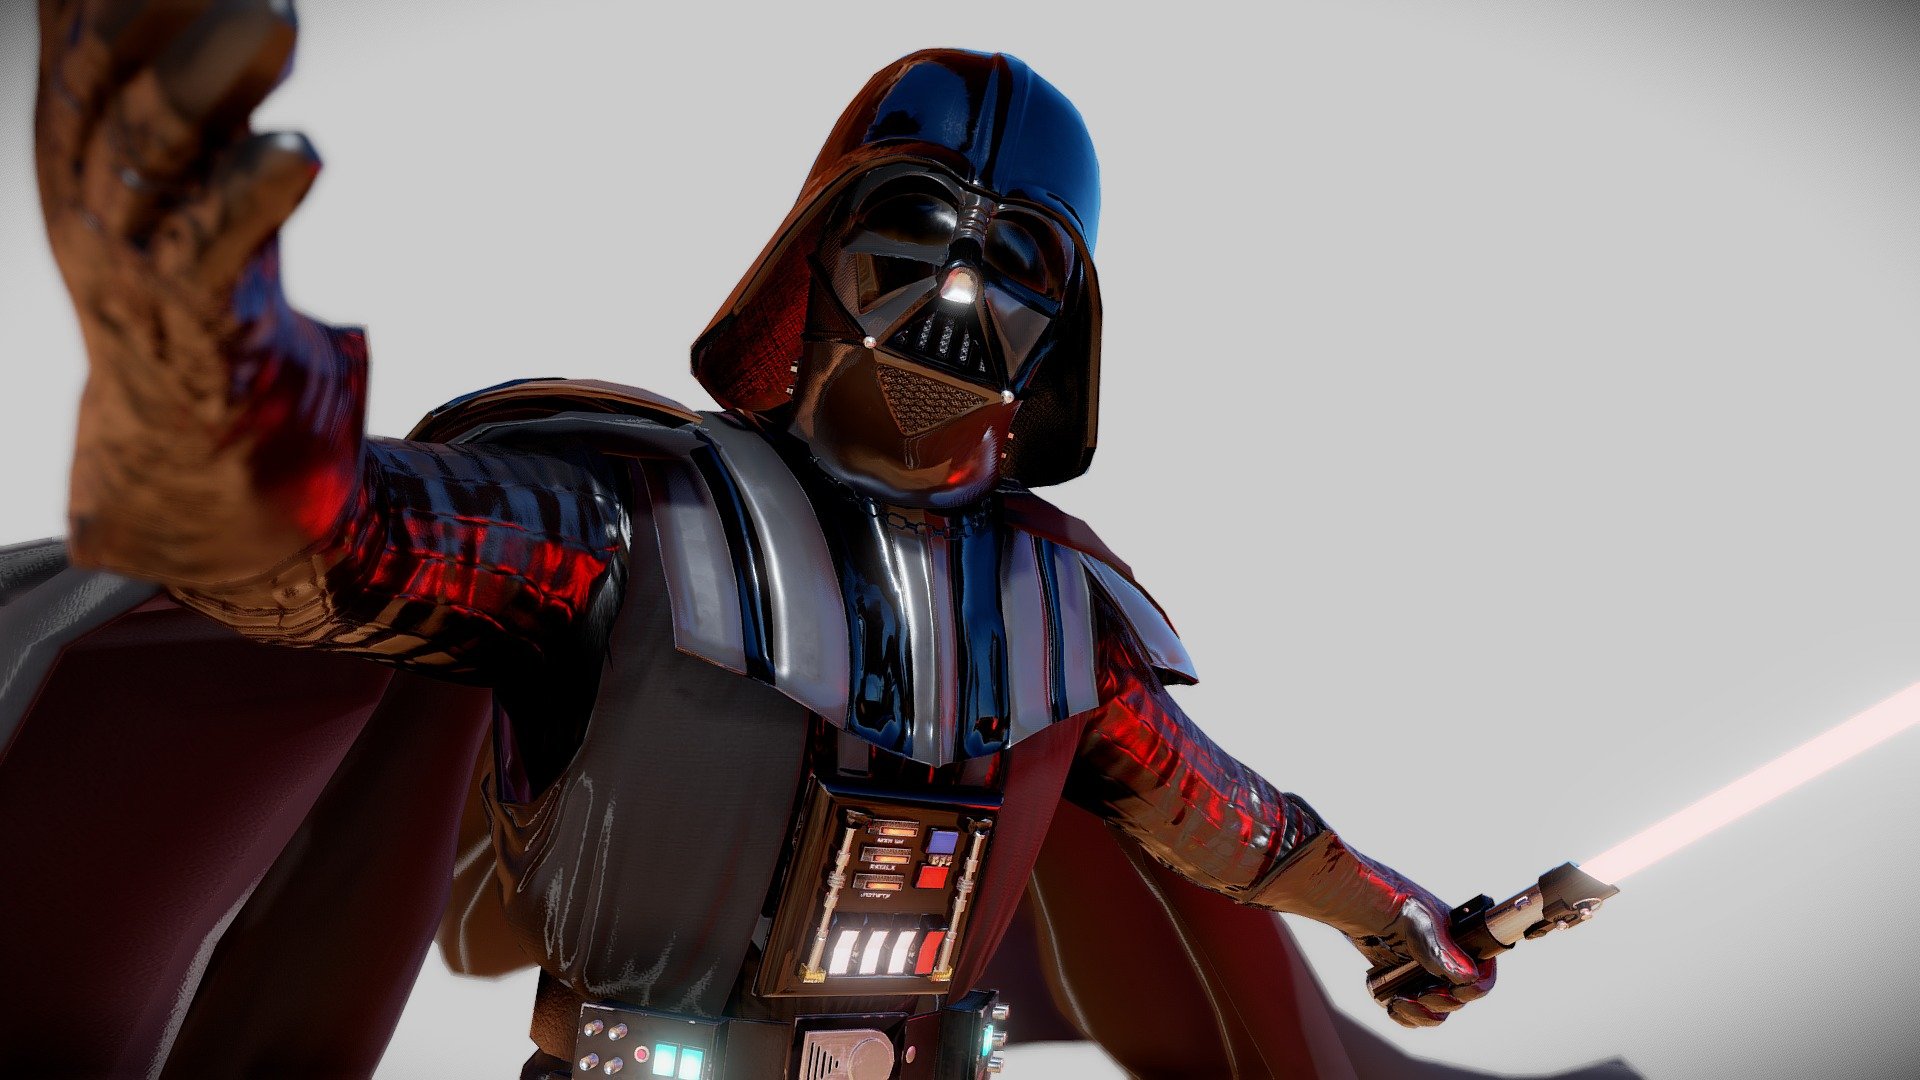 When this VRChat Avatar was commissioned, the goal was simple: Create the most accurate and realistic Darth Vader inspired model, then make it run in VR. And now, I an share this model with you too!


What you get
This model is game ready, VR ready, and looks great in renders! The rig is designed to work in Untiy and VR chat, but will work in most 3D software. The cape is rigged with a series of bones to make Dynamic Bone simulation possible, but you can overide that in your software of choice real time cloth sims. The lightsaber blade is rigged to be fully controlable through animation or scripting.

Incudes the Darth Vader model, Darth Vader lightsaber hilt and blade models, full texture sets in up to 4k resolution, custom made punchcard texture for the animated lights, custom unity shaders (Built in render pipline, shaderforge editable). Vader is fully rigged and fully UV'd. Textures come in an efficient channle packed format, as well as individual textures to fit any workflow 3d model